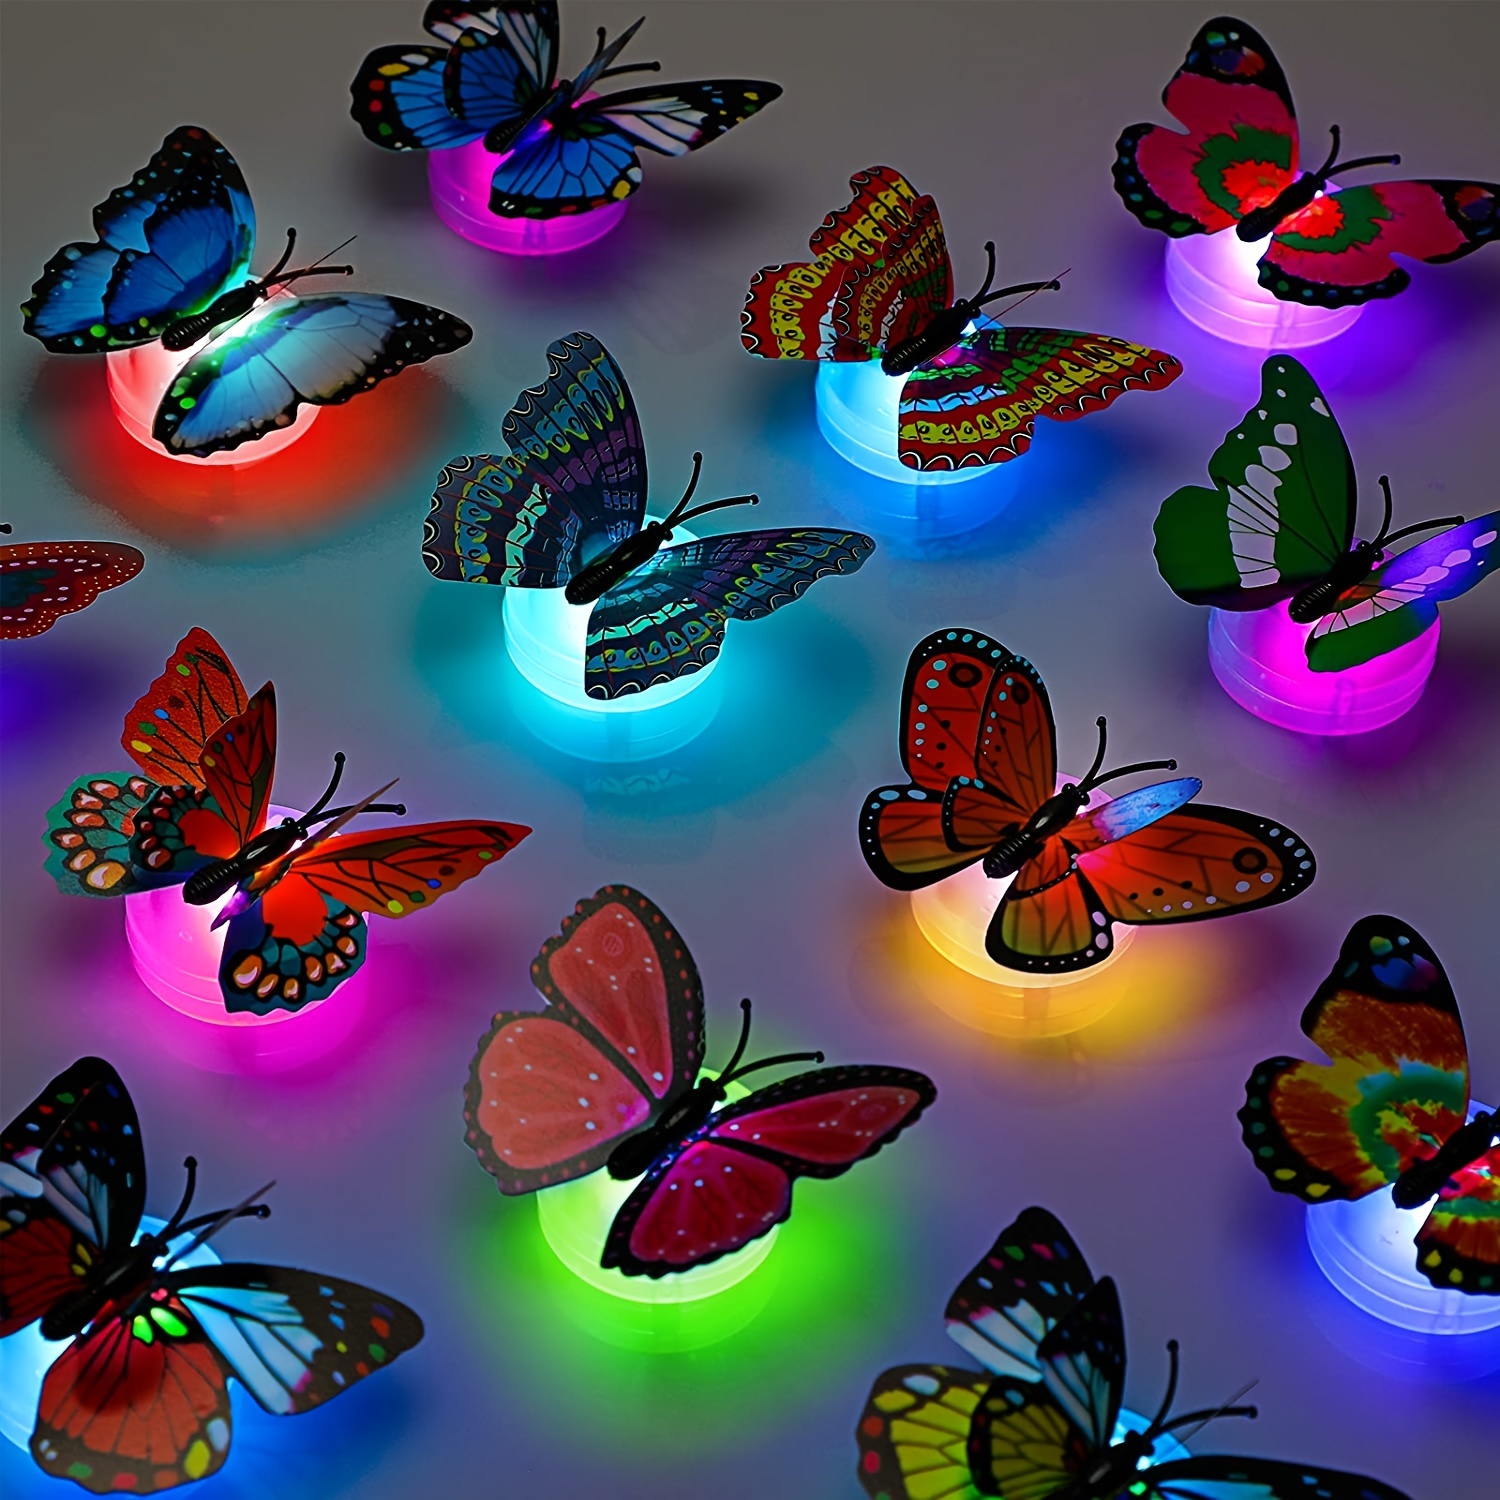 3D Butterfly Stickers, Pack of 10, Mardel